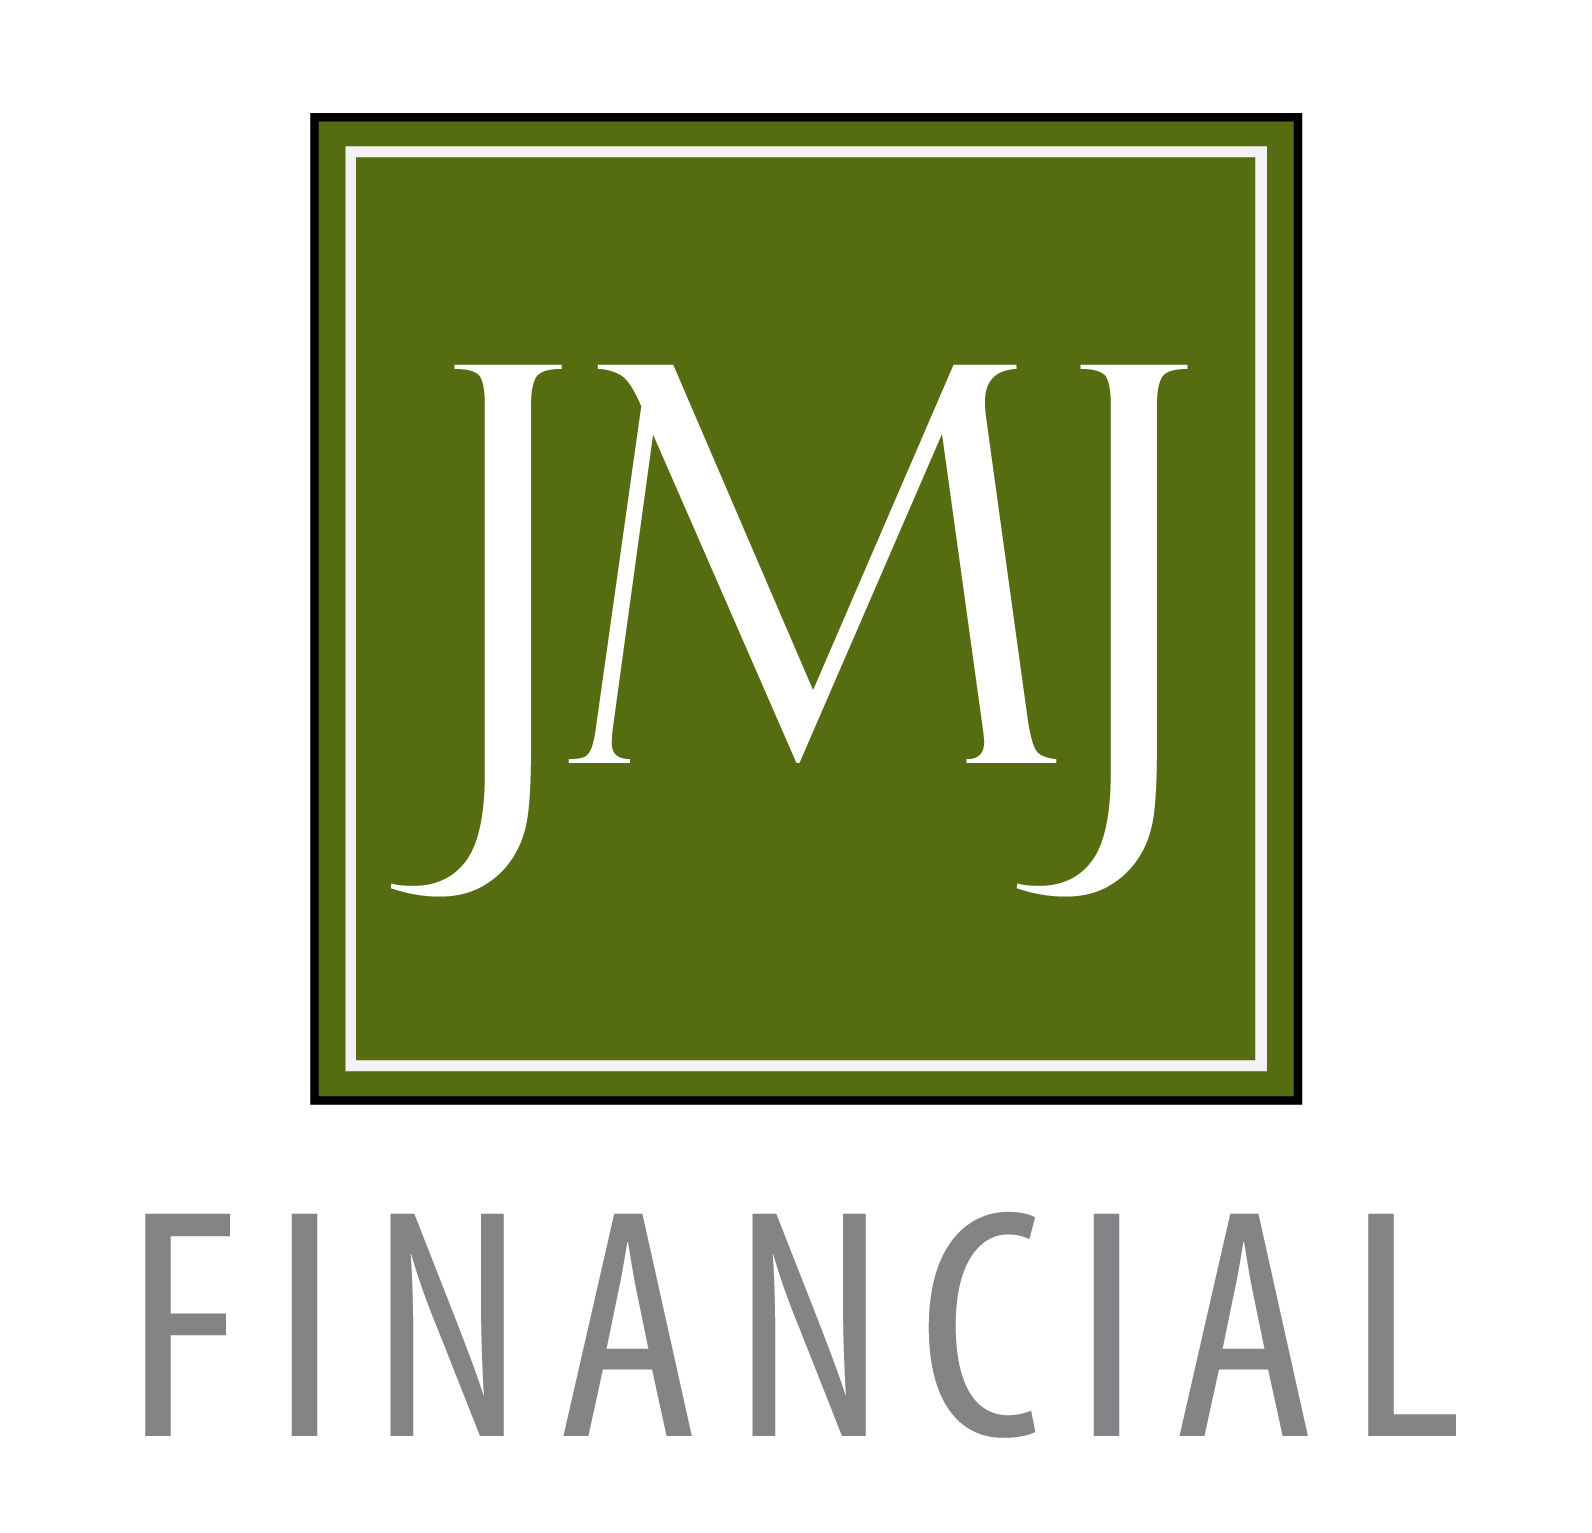 JMJ Financial Holds Over 130 Structured Investments in Small Cap Publicly Traded Companies